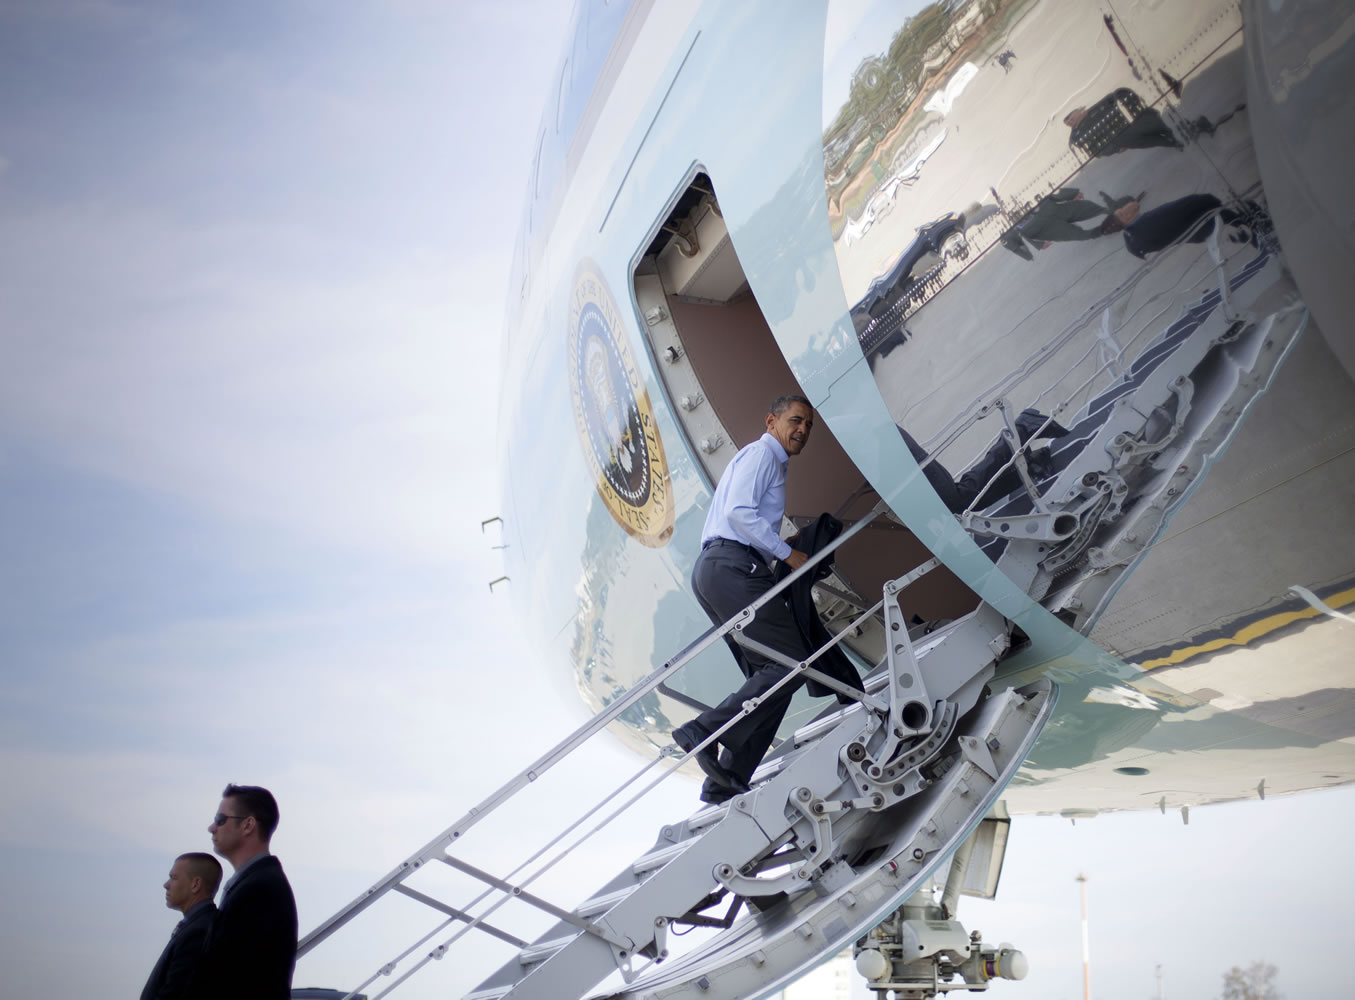 President Barack Obama boards Air Force One on Saturday at Ramstein Air Base in Germany. Air Force One was making a refueling stop and Obama used the opportunity to meet with members of the U.S.